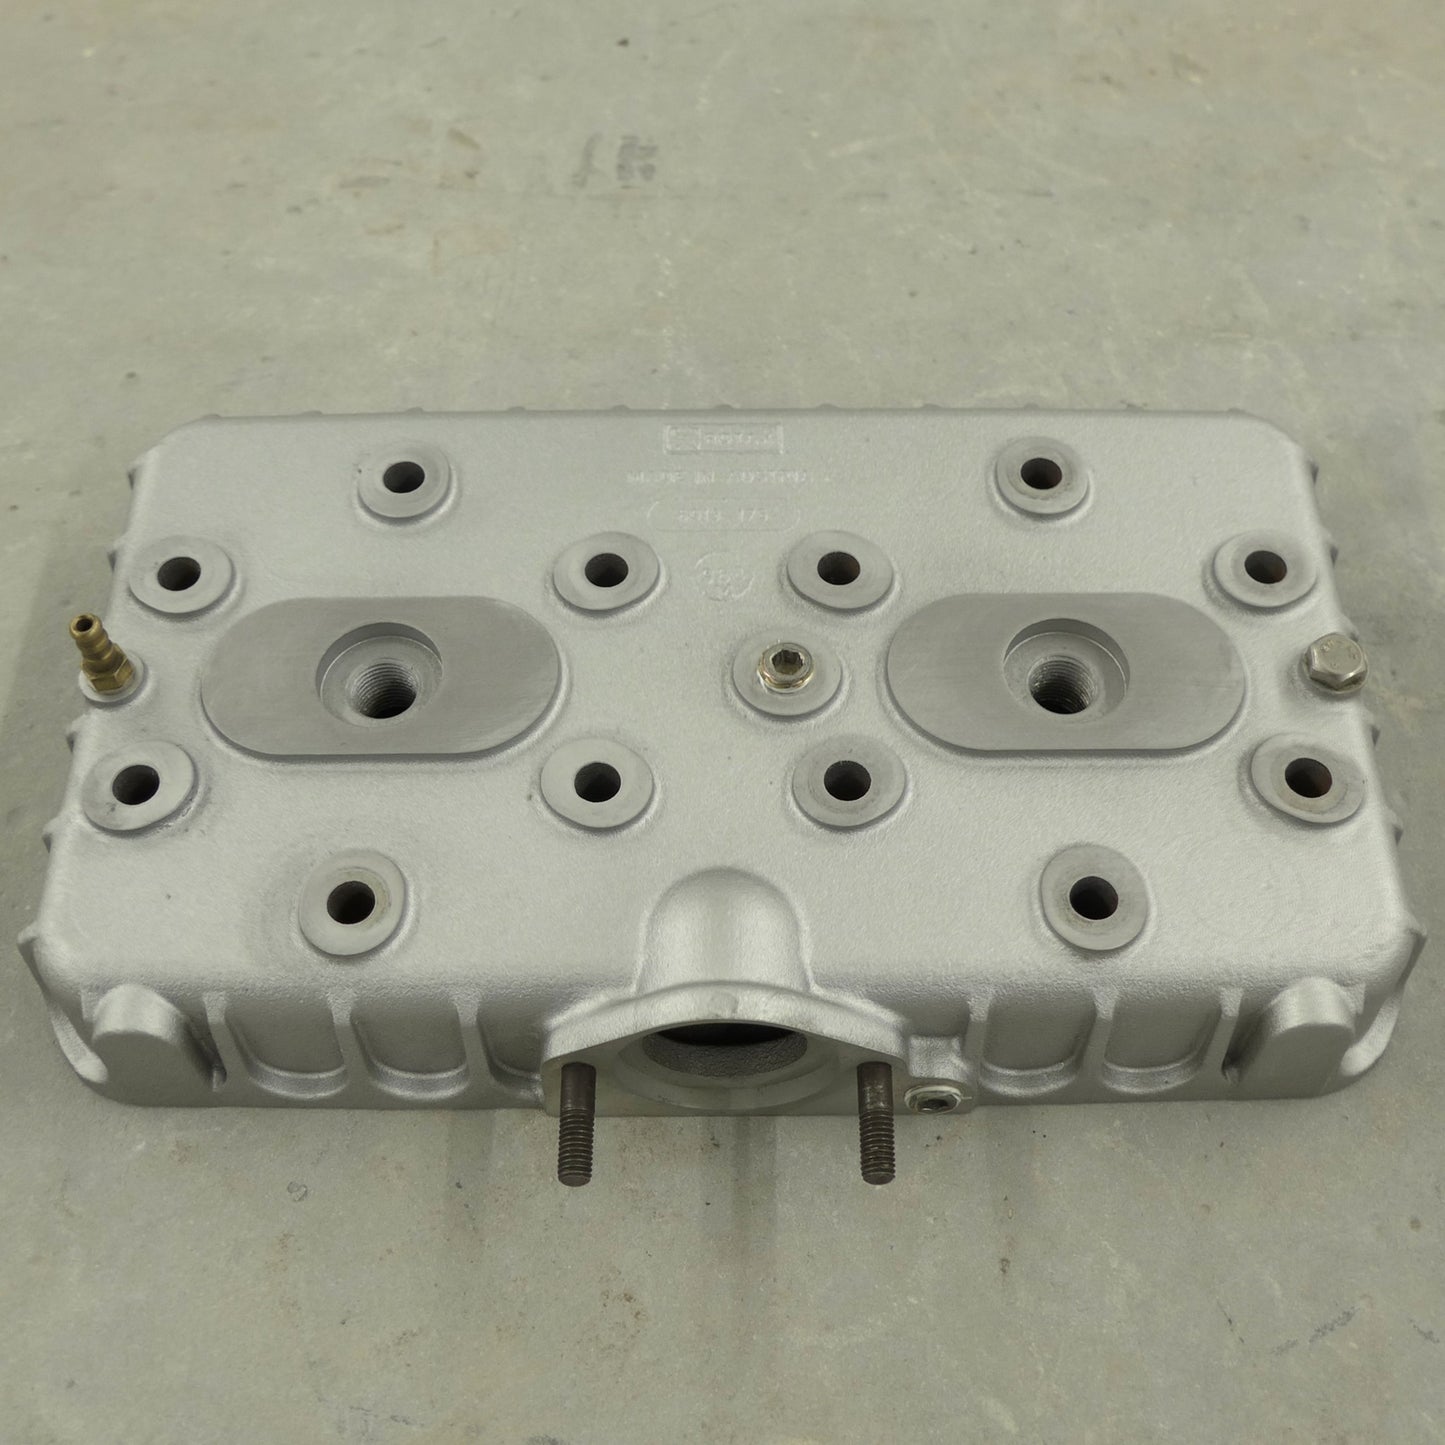 Rotax 532 Reconditioned Cylinder Head -Single Ignition (A/R)